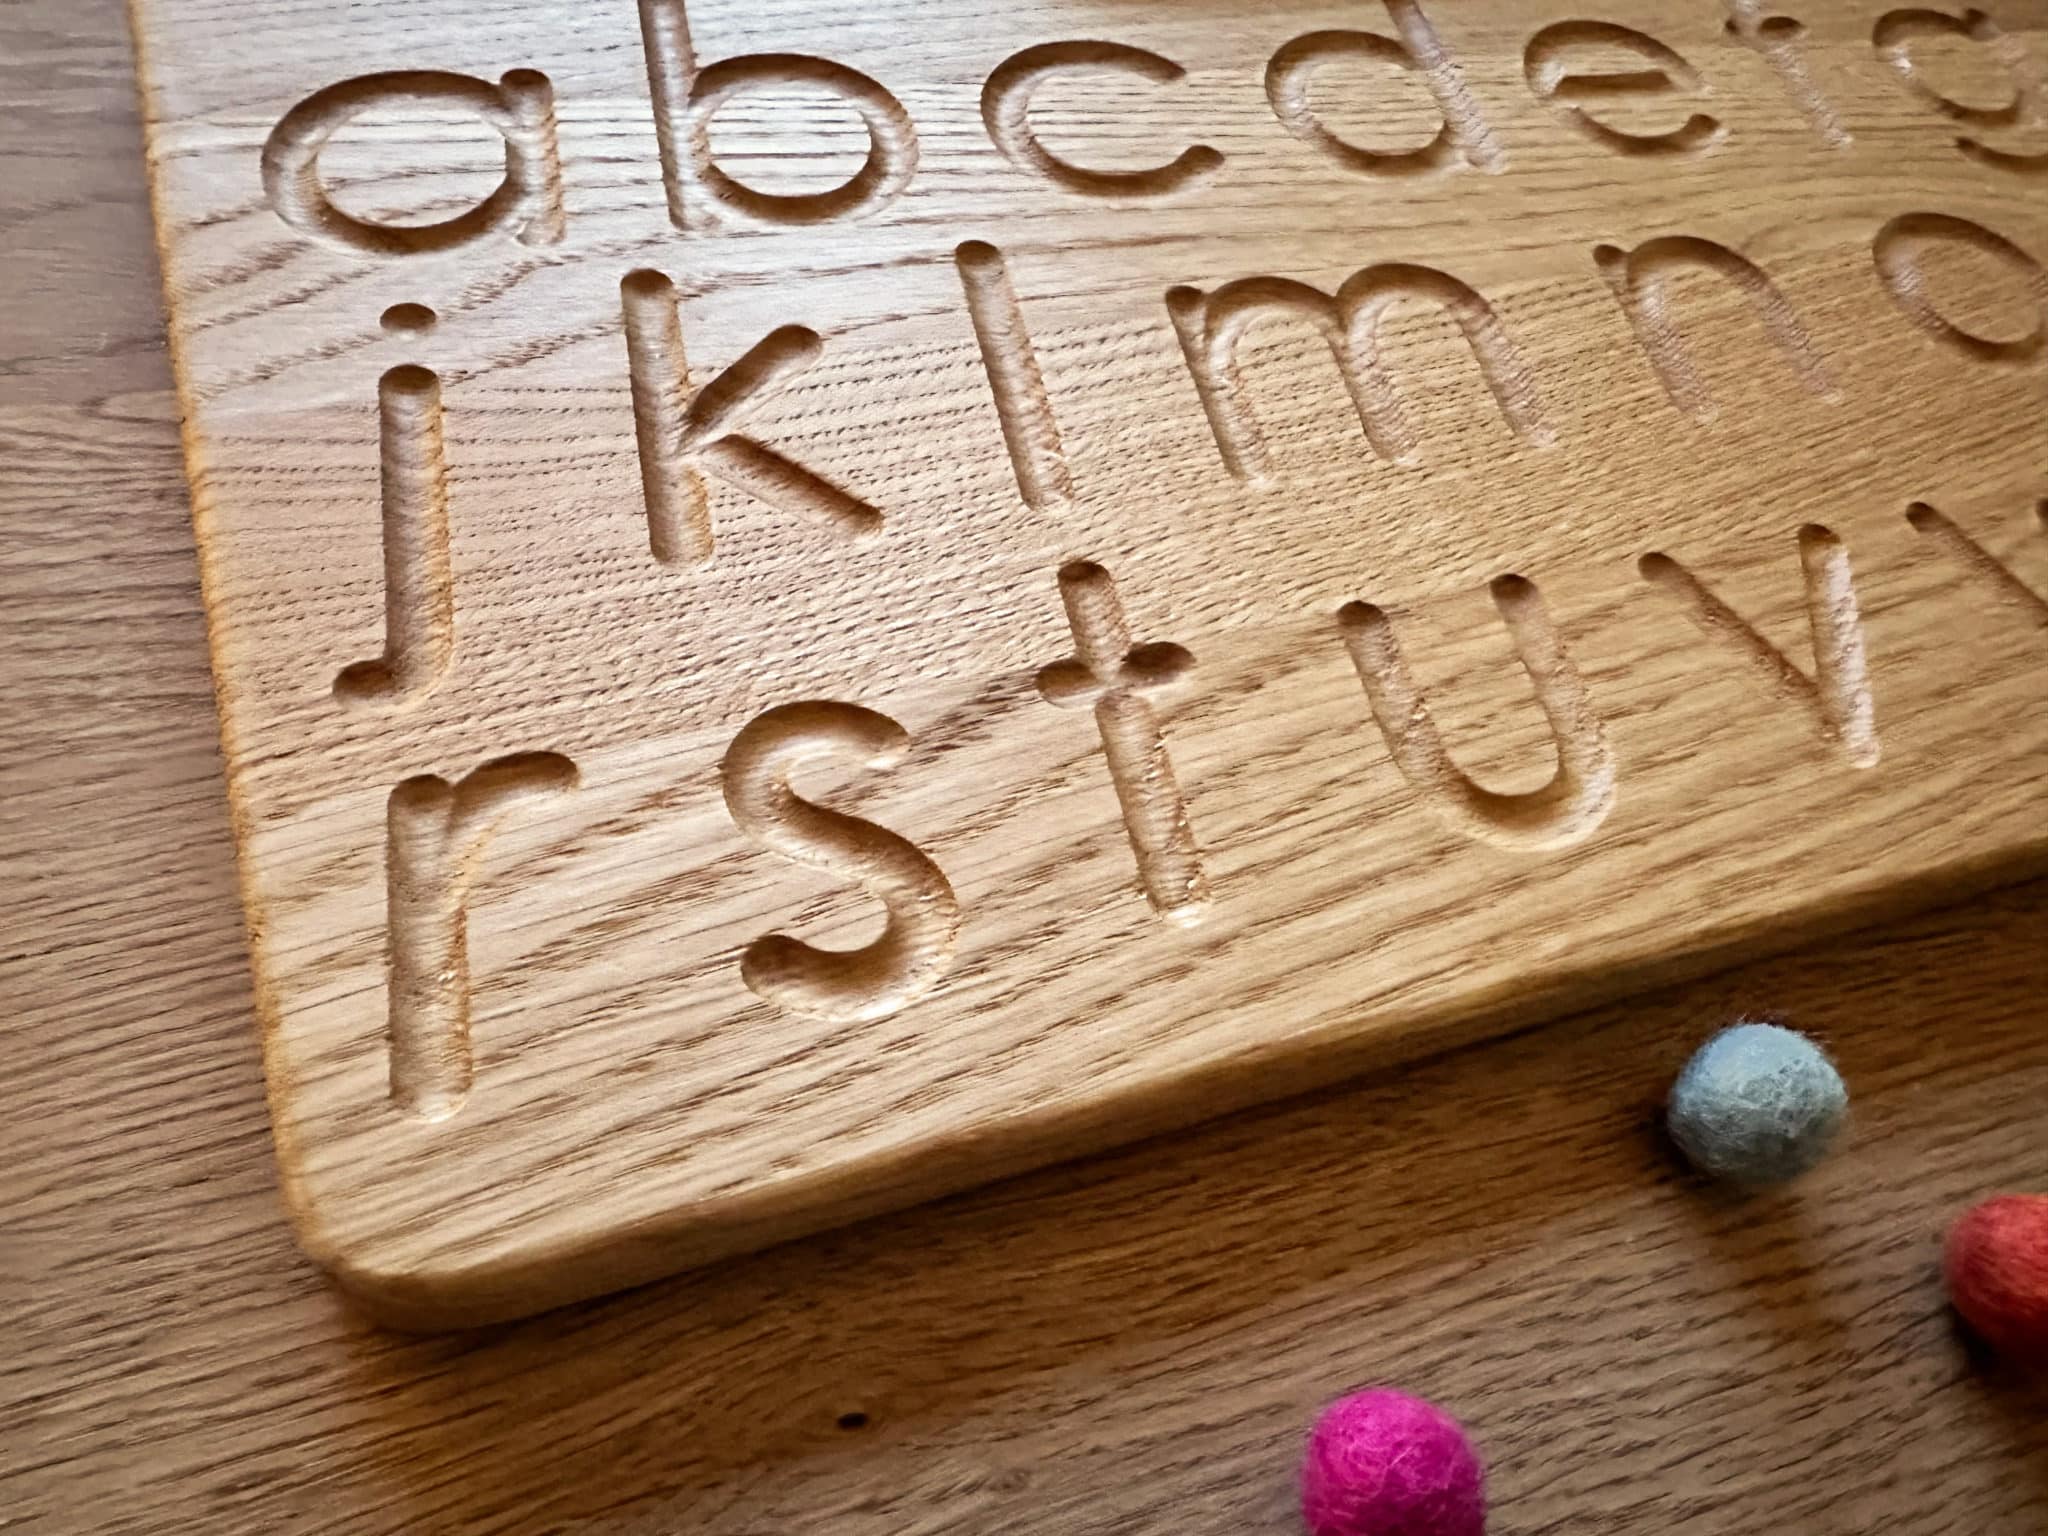 Wooden Montessori Number Tracing Board